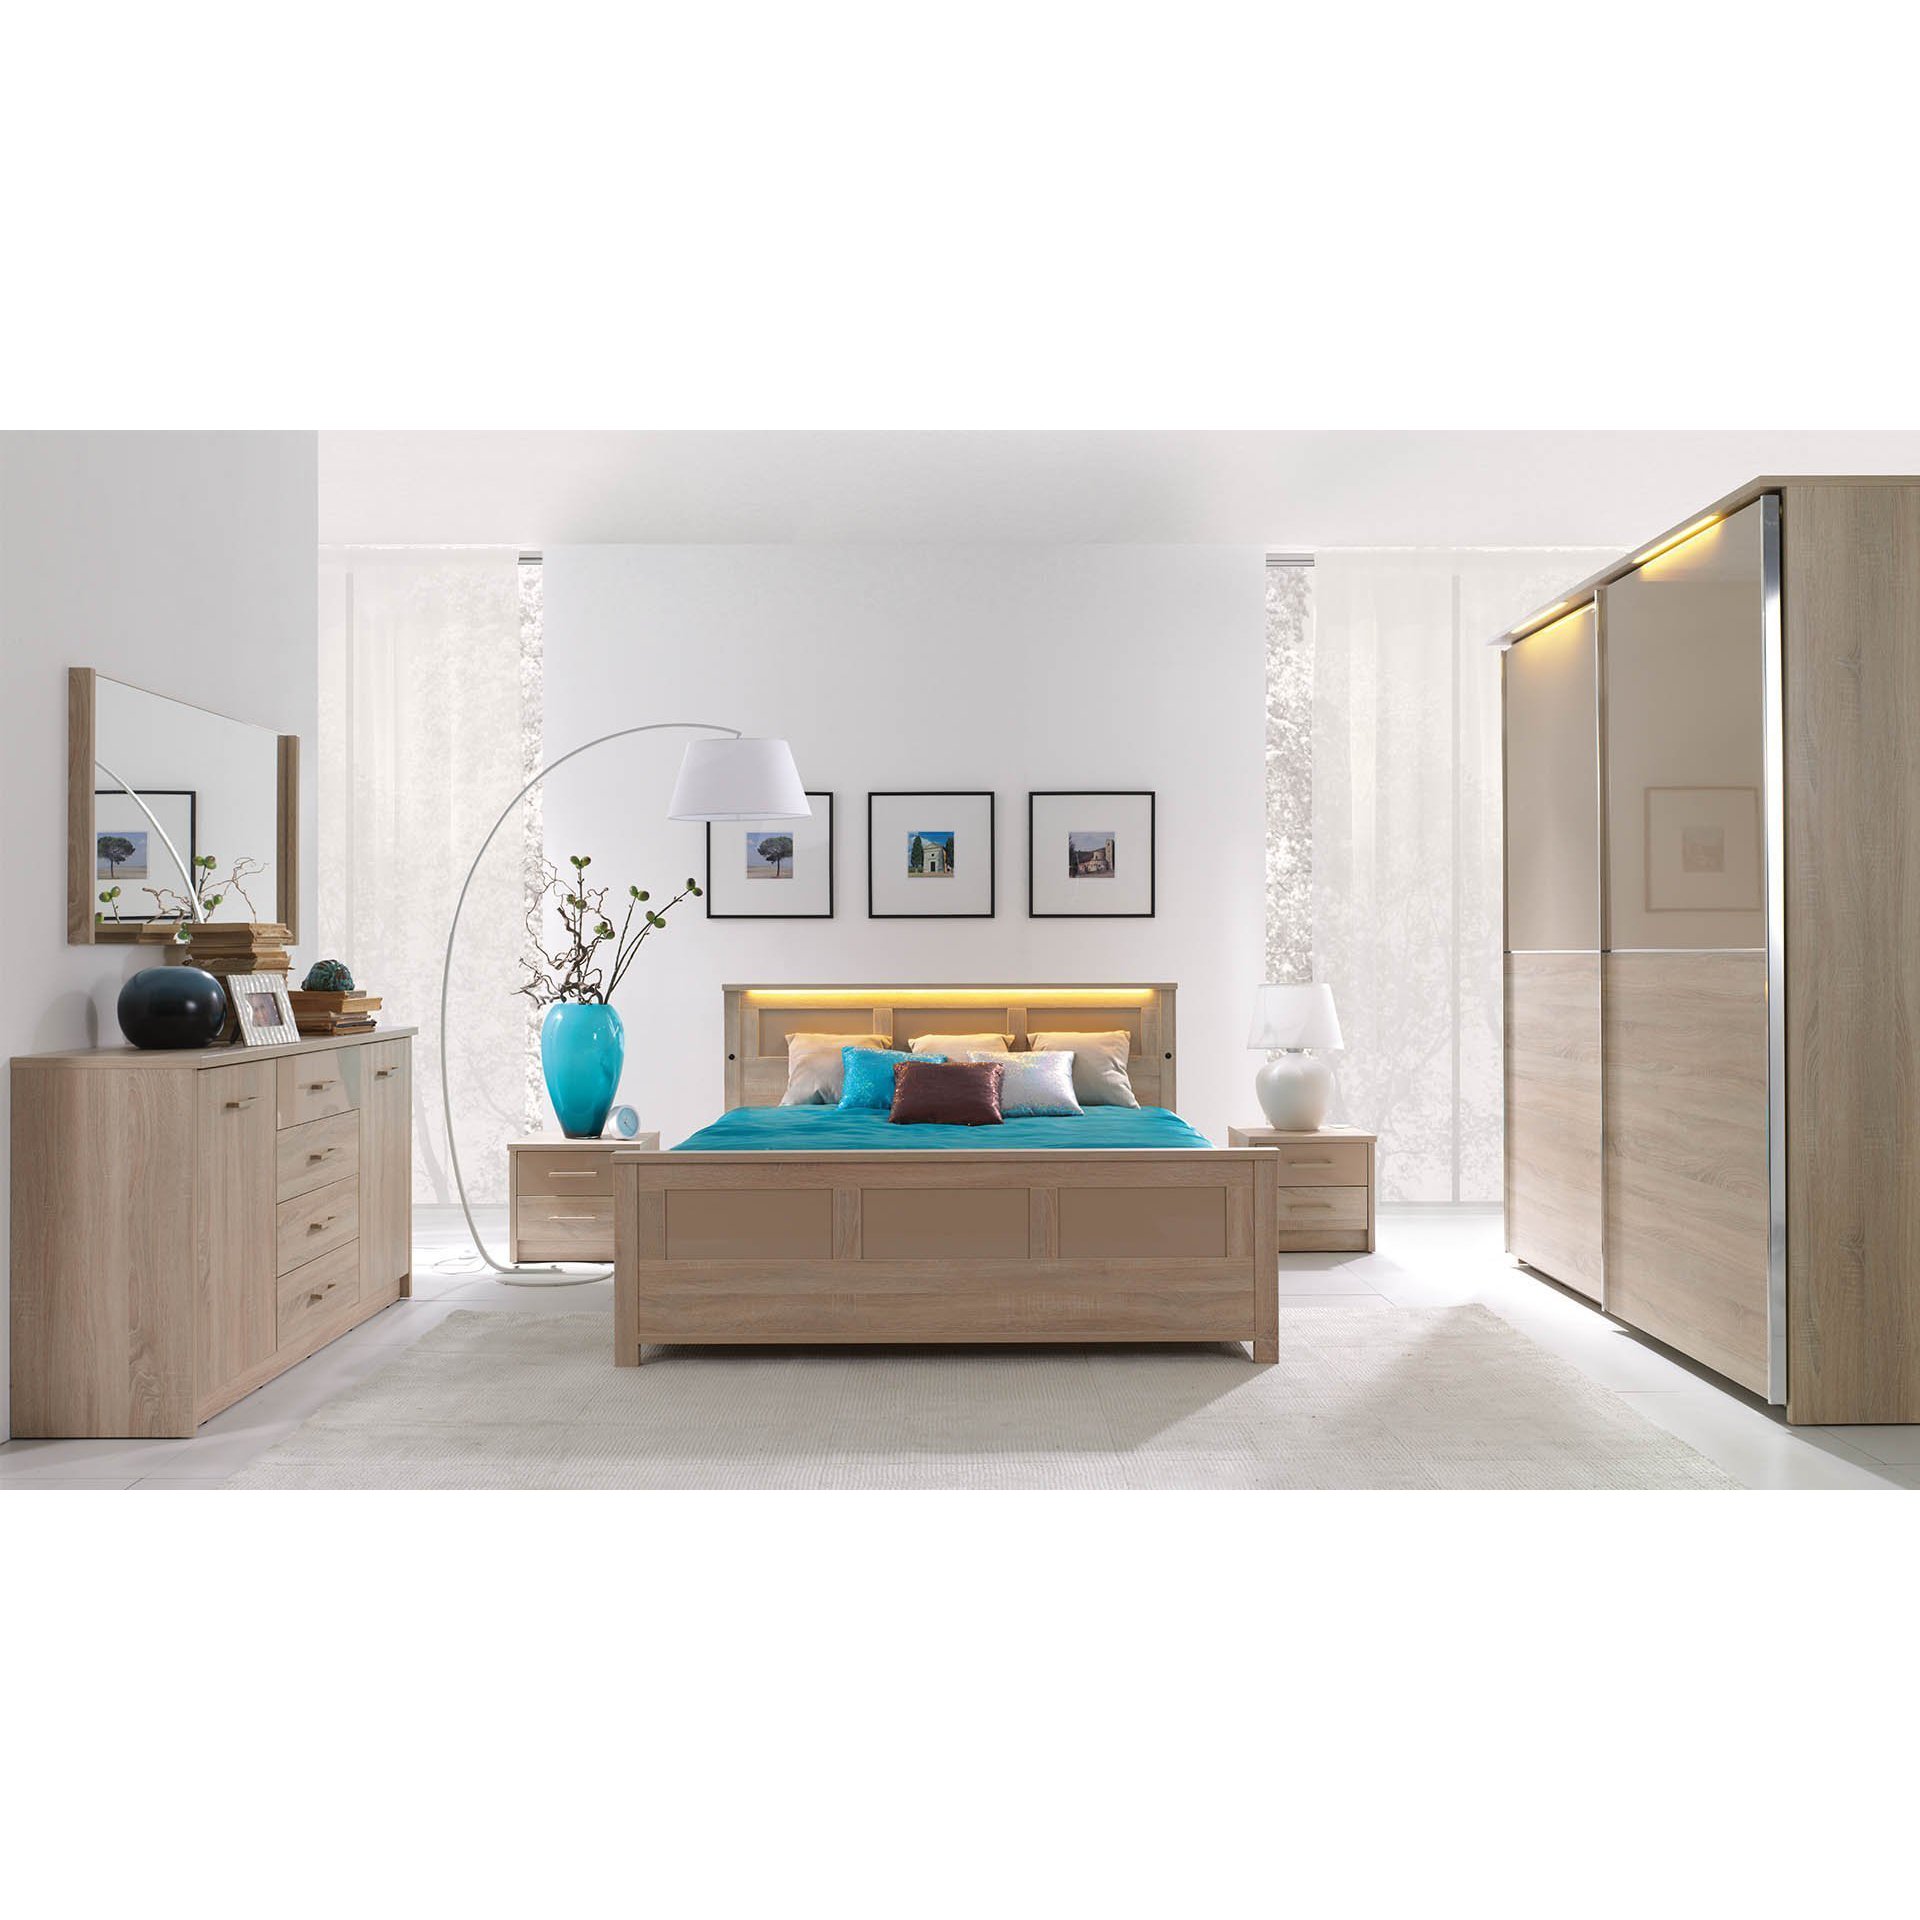 Cremona Bed with Storage and LED Lights - Oak Sonoma 180 x 200cm